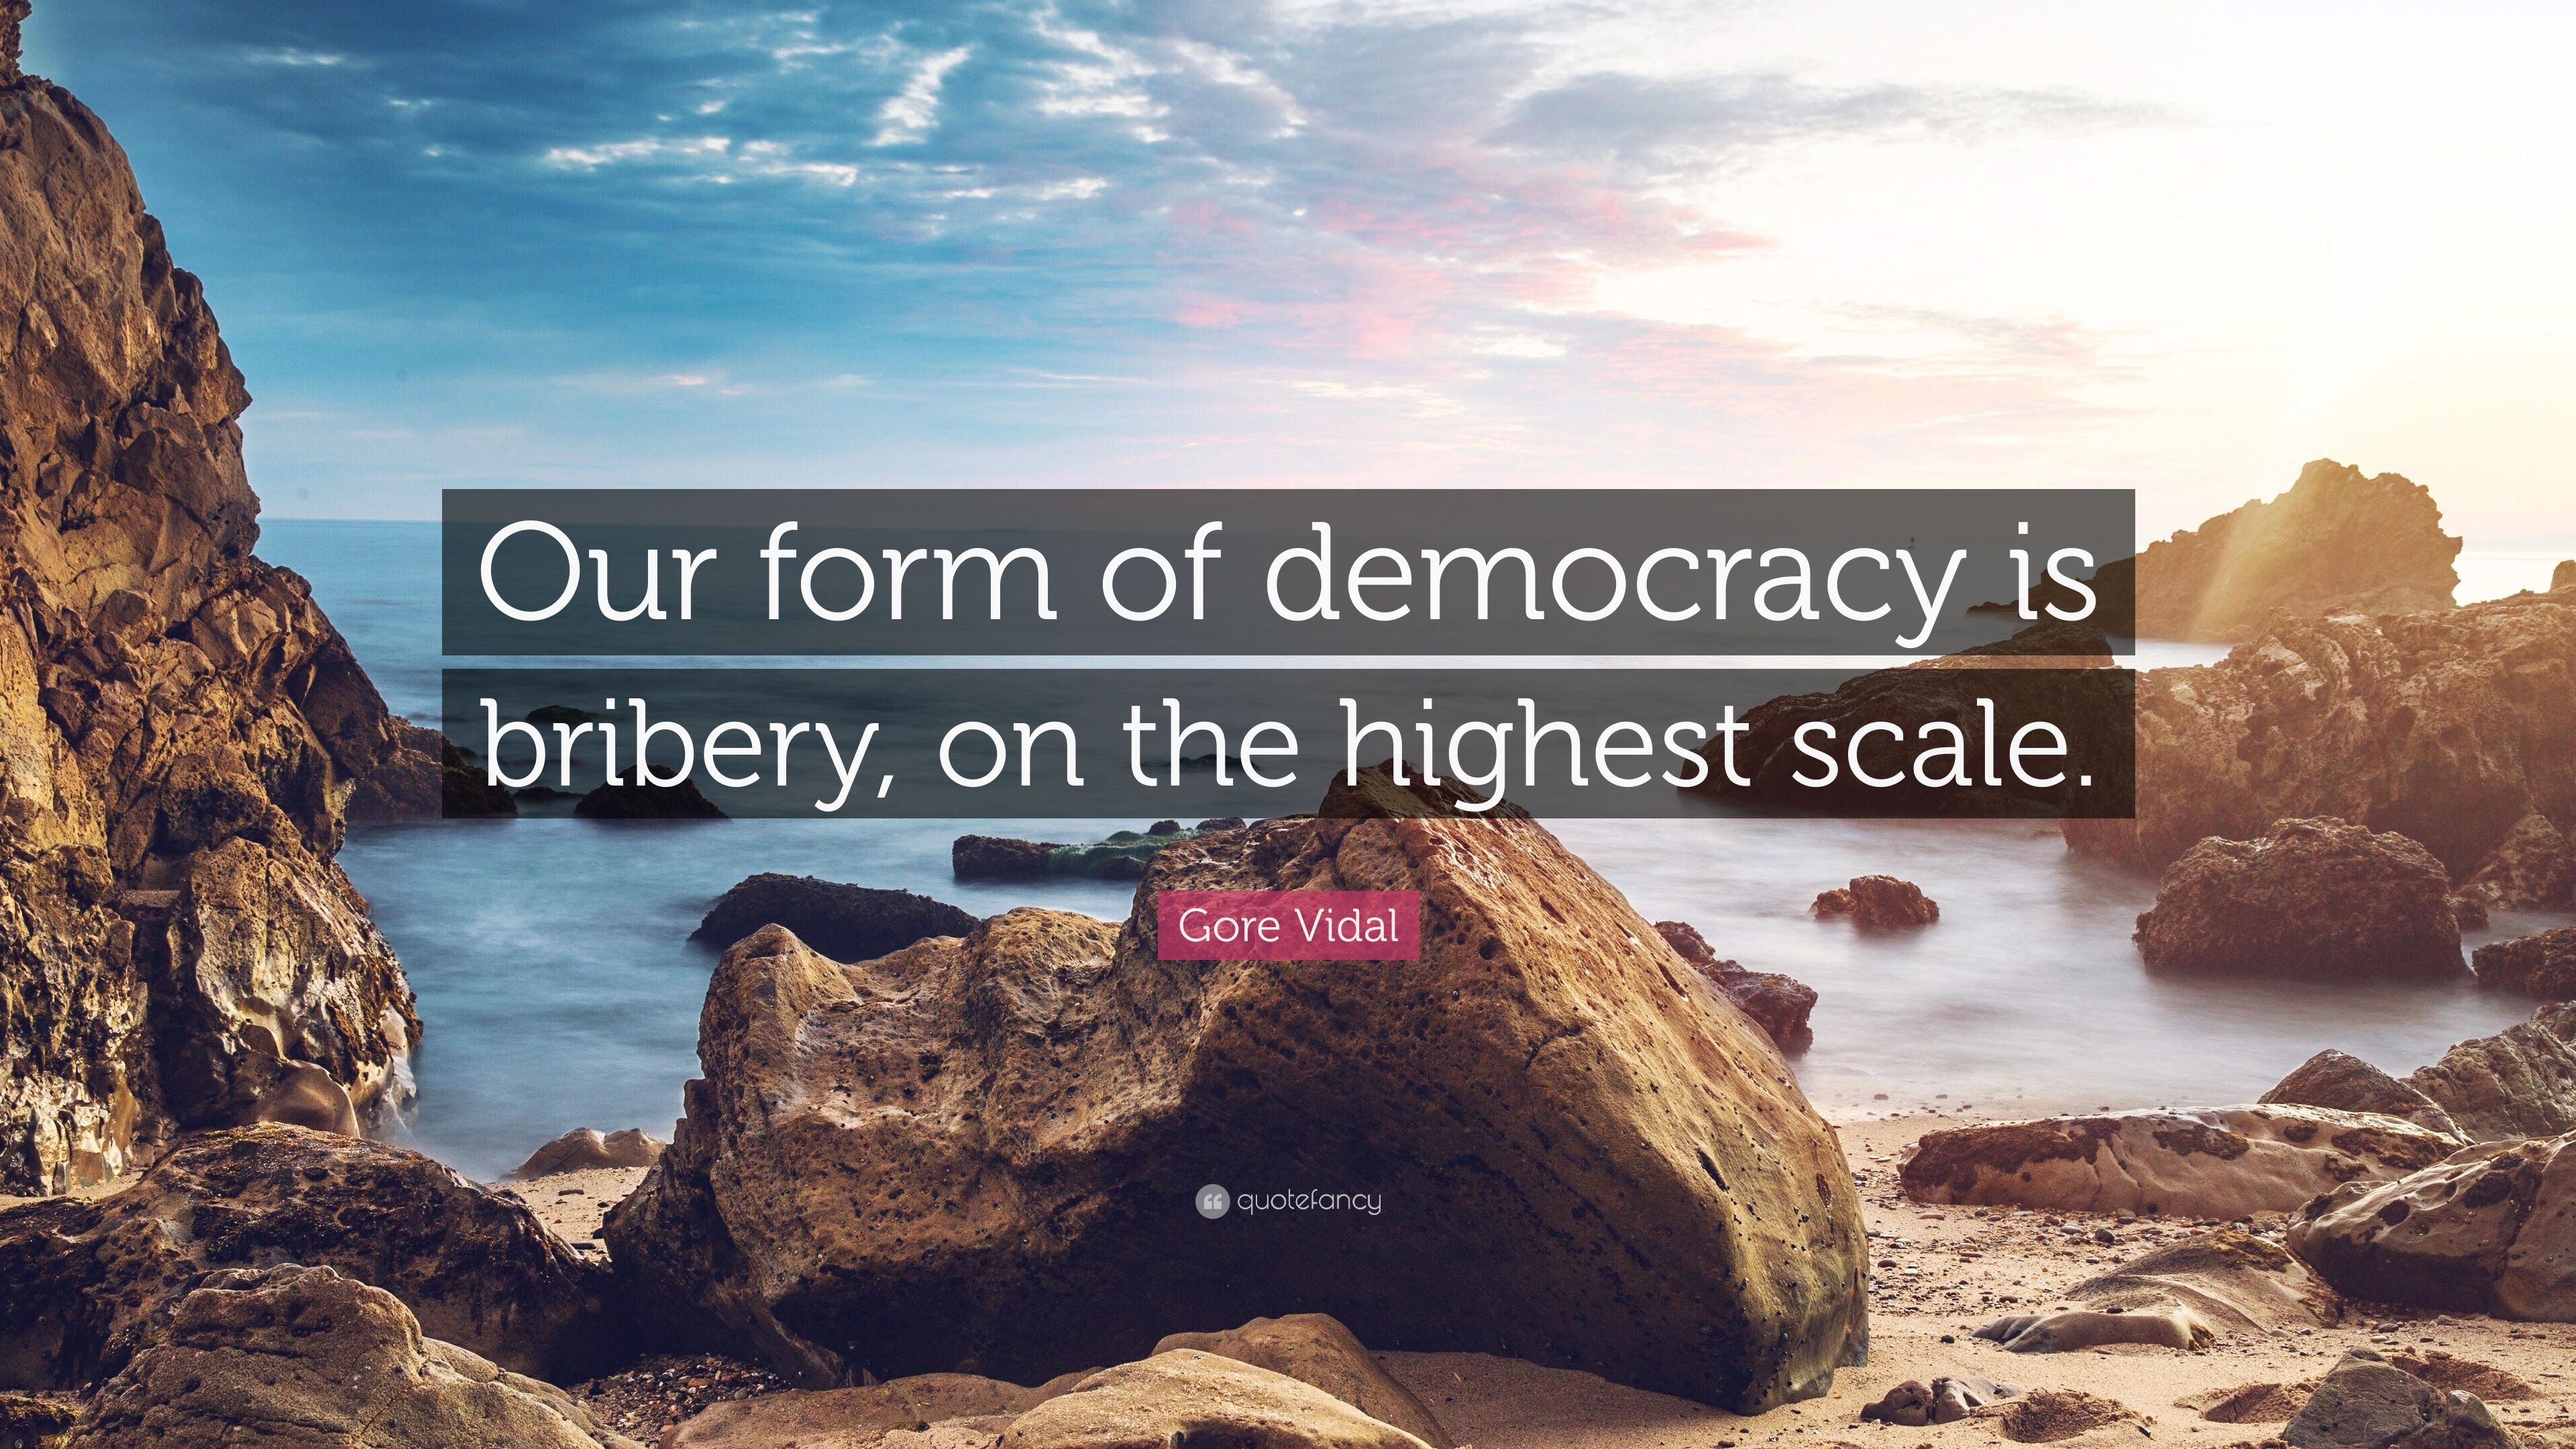 Gore Vidal Quote: “Our form of democracy is bribery, on